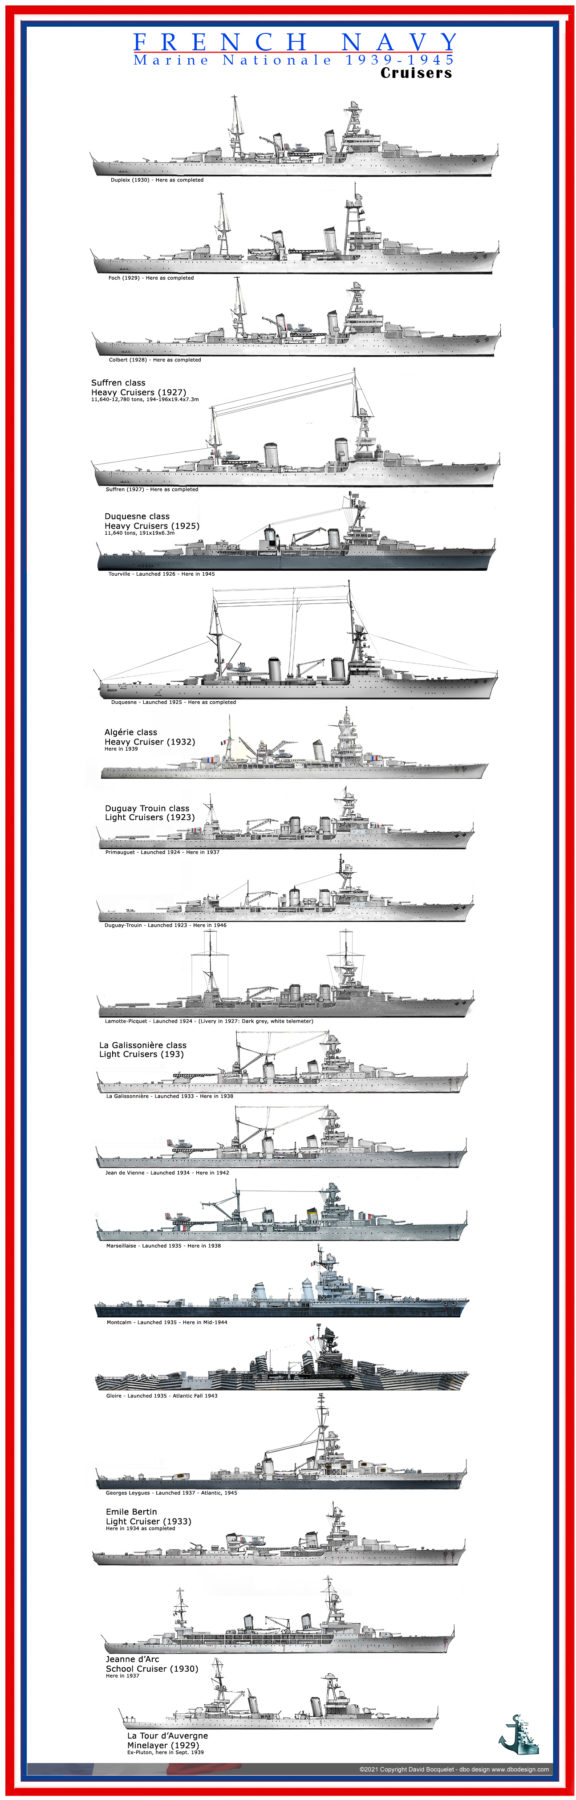 An overview of individual French cruisers with various liveries